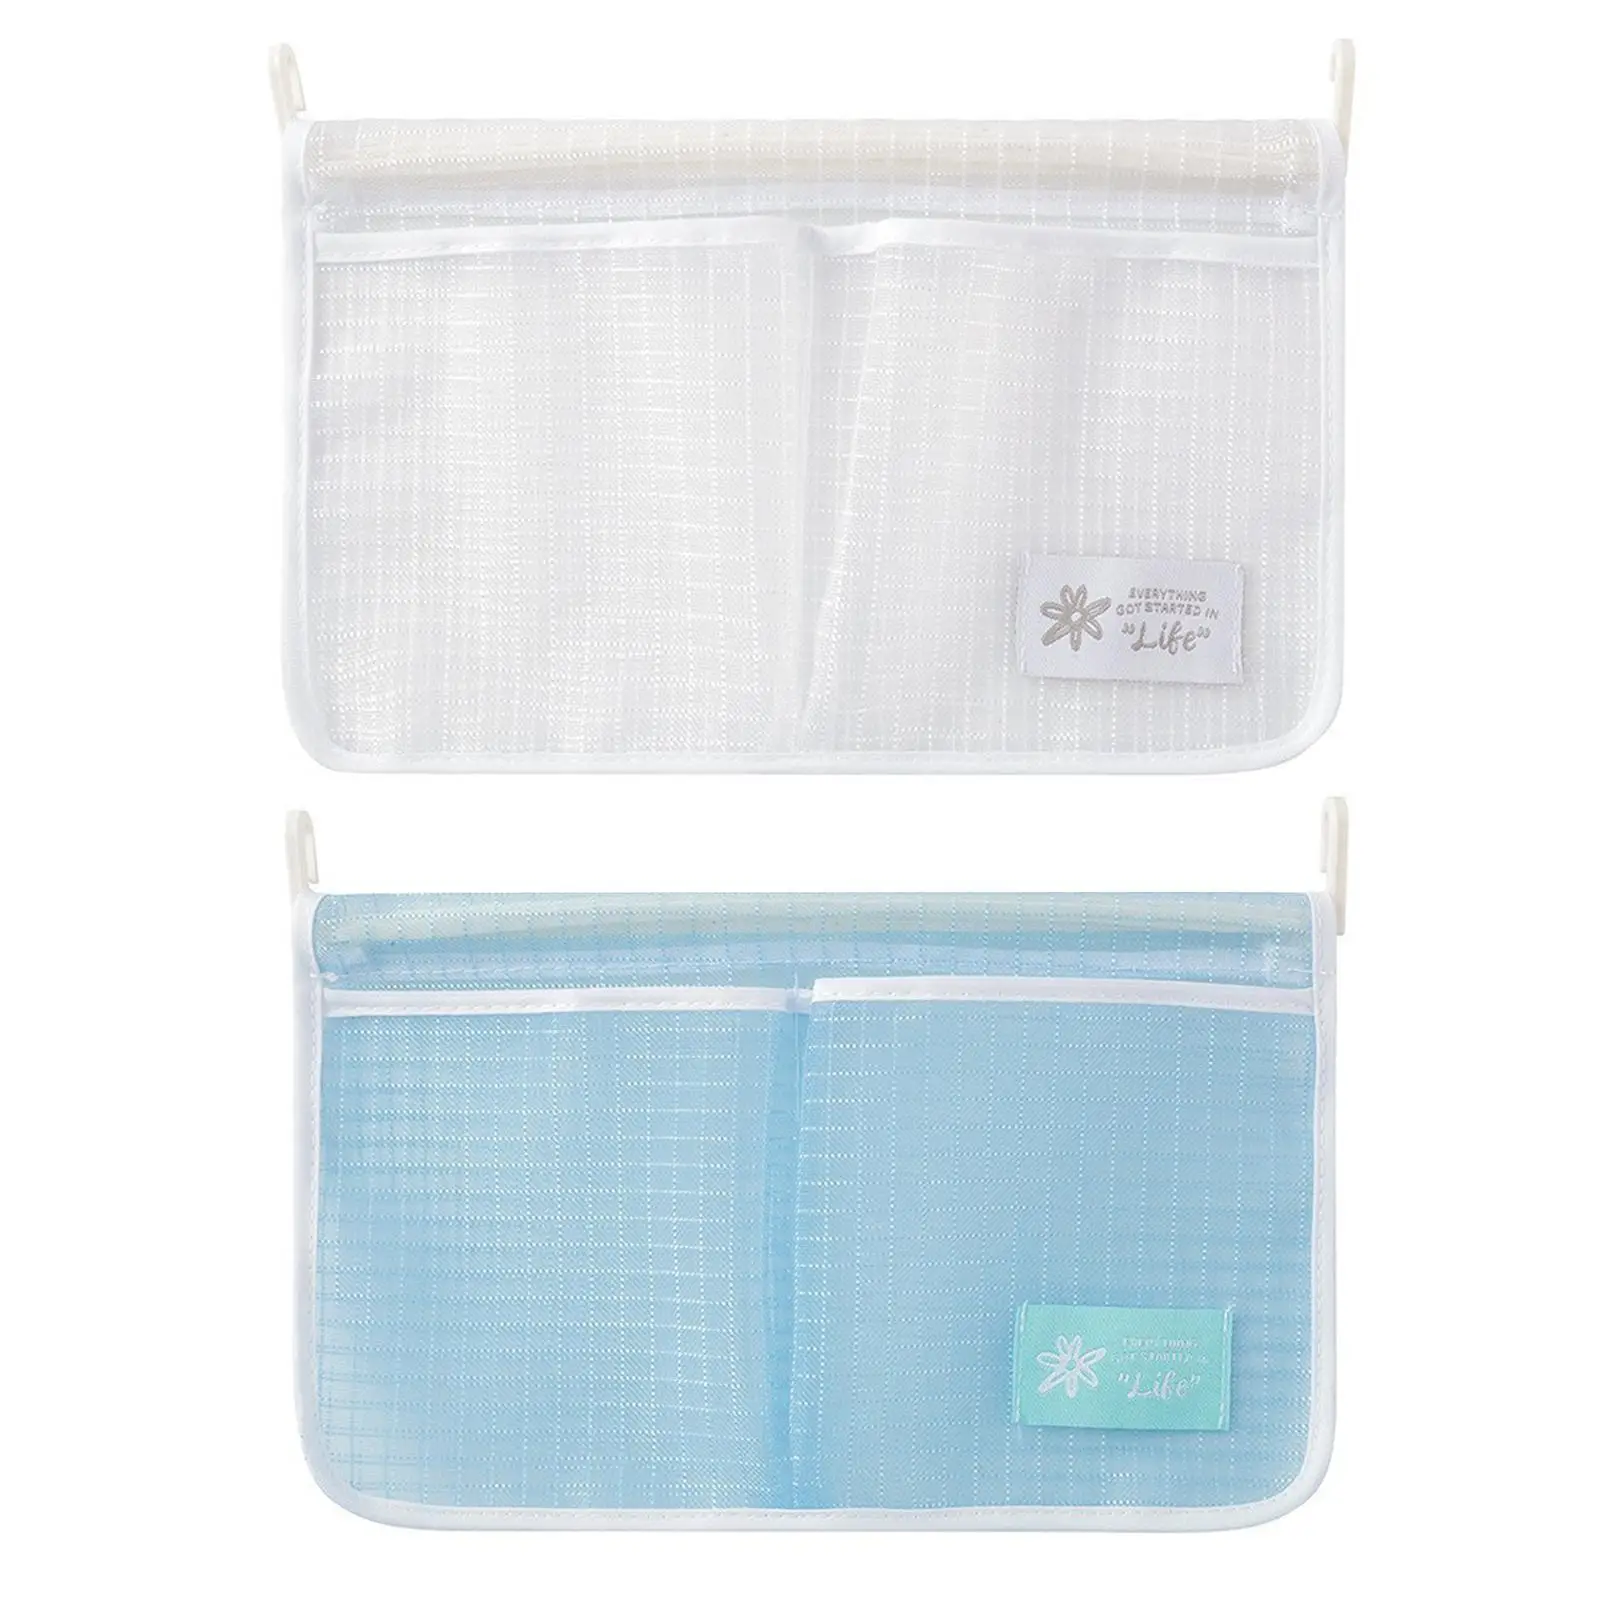 Fridge Storage Mesh Bags Multifunction Makeup Holder Tote Bags Double Compartment Hanging Organizer Bags with Hooks